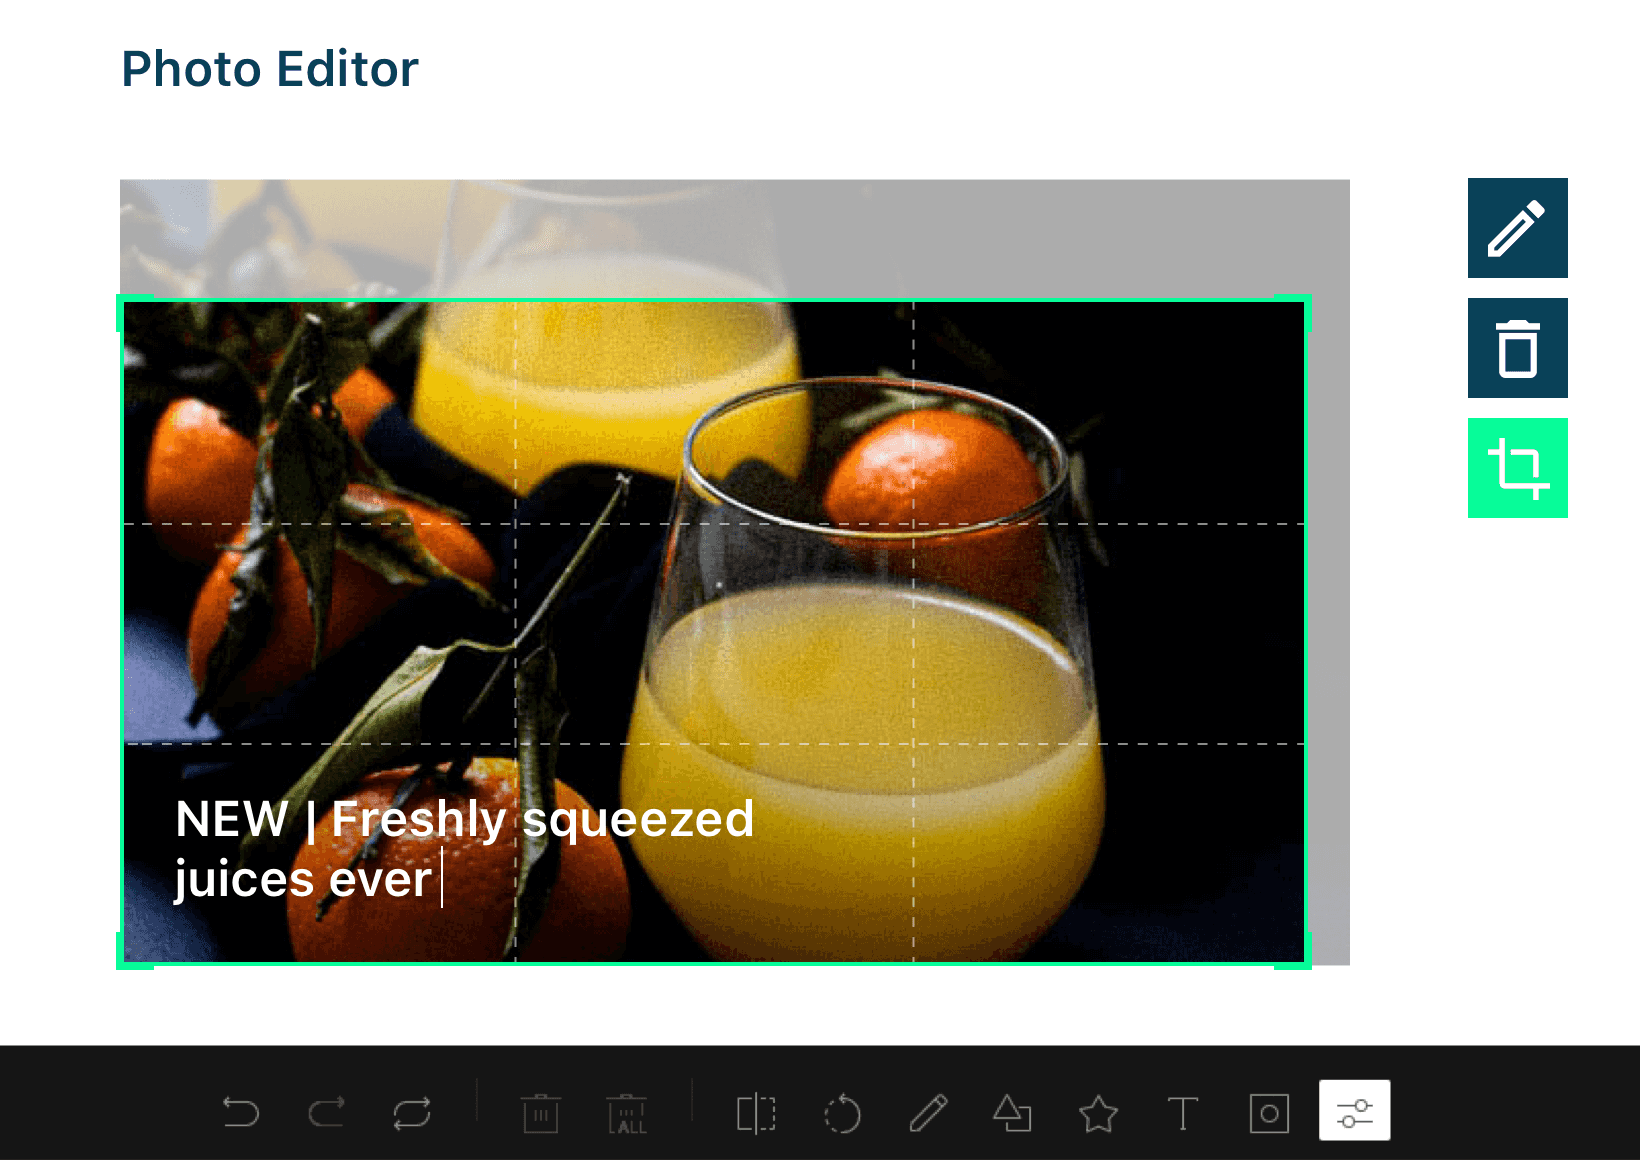 View of the photo editor in the qnips dashboard